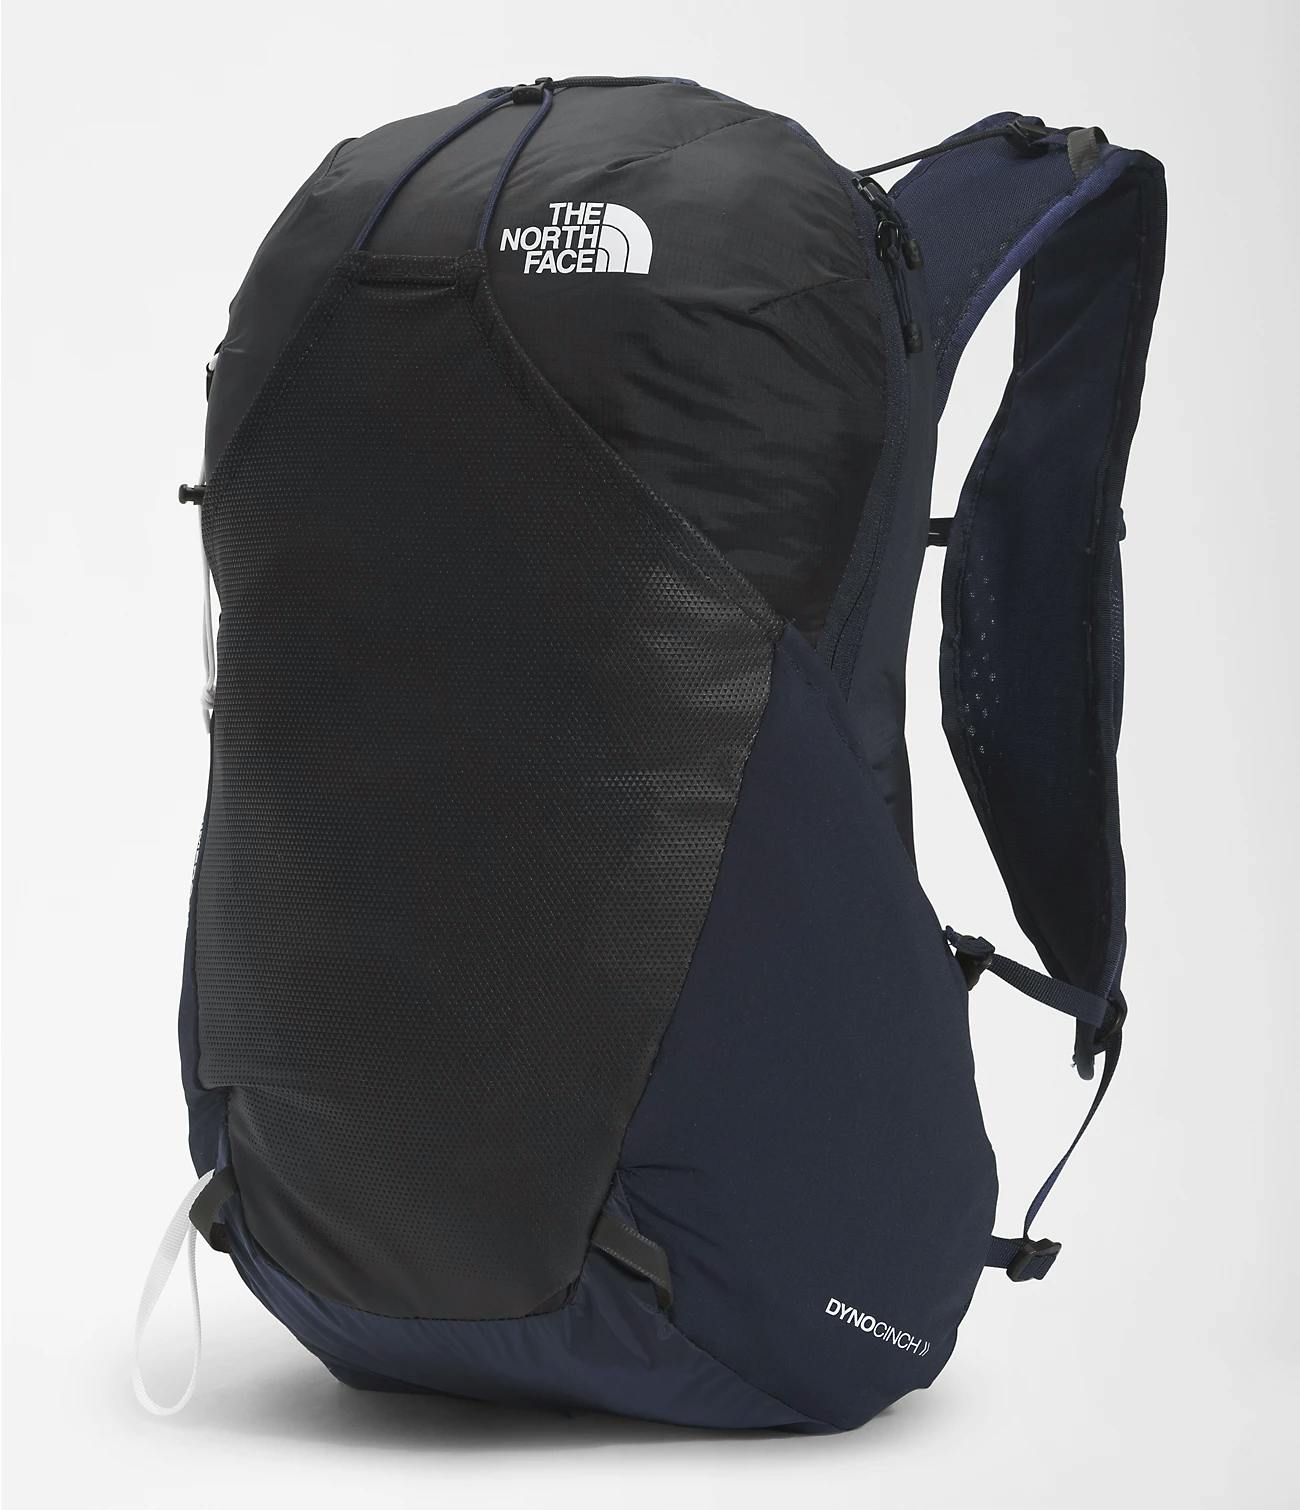 The North Face Chimera 18L Backpack · Black / Aviator Navy